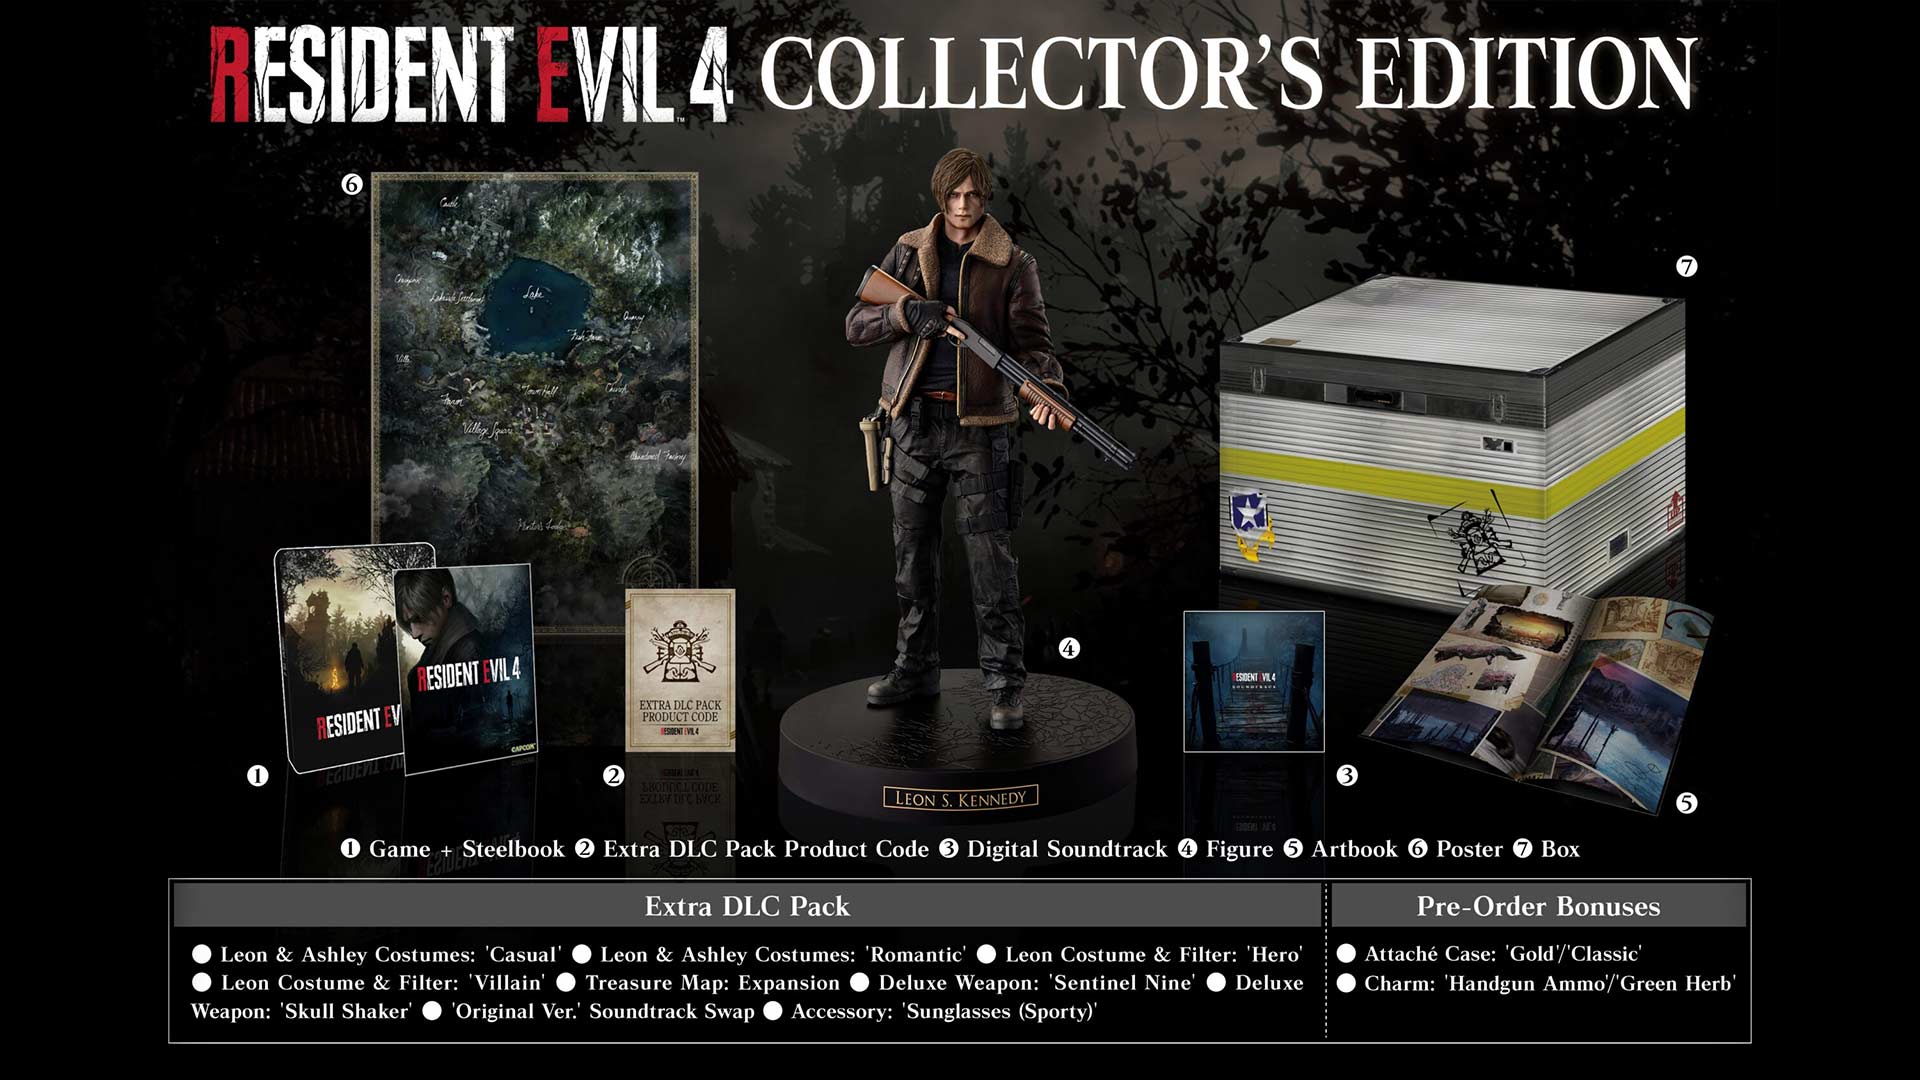 Resident Evil 4 - Collectors Edition